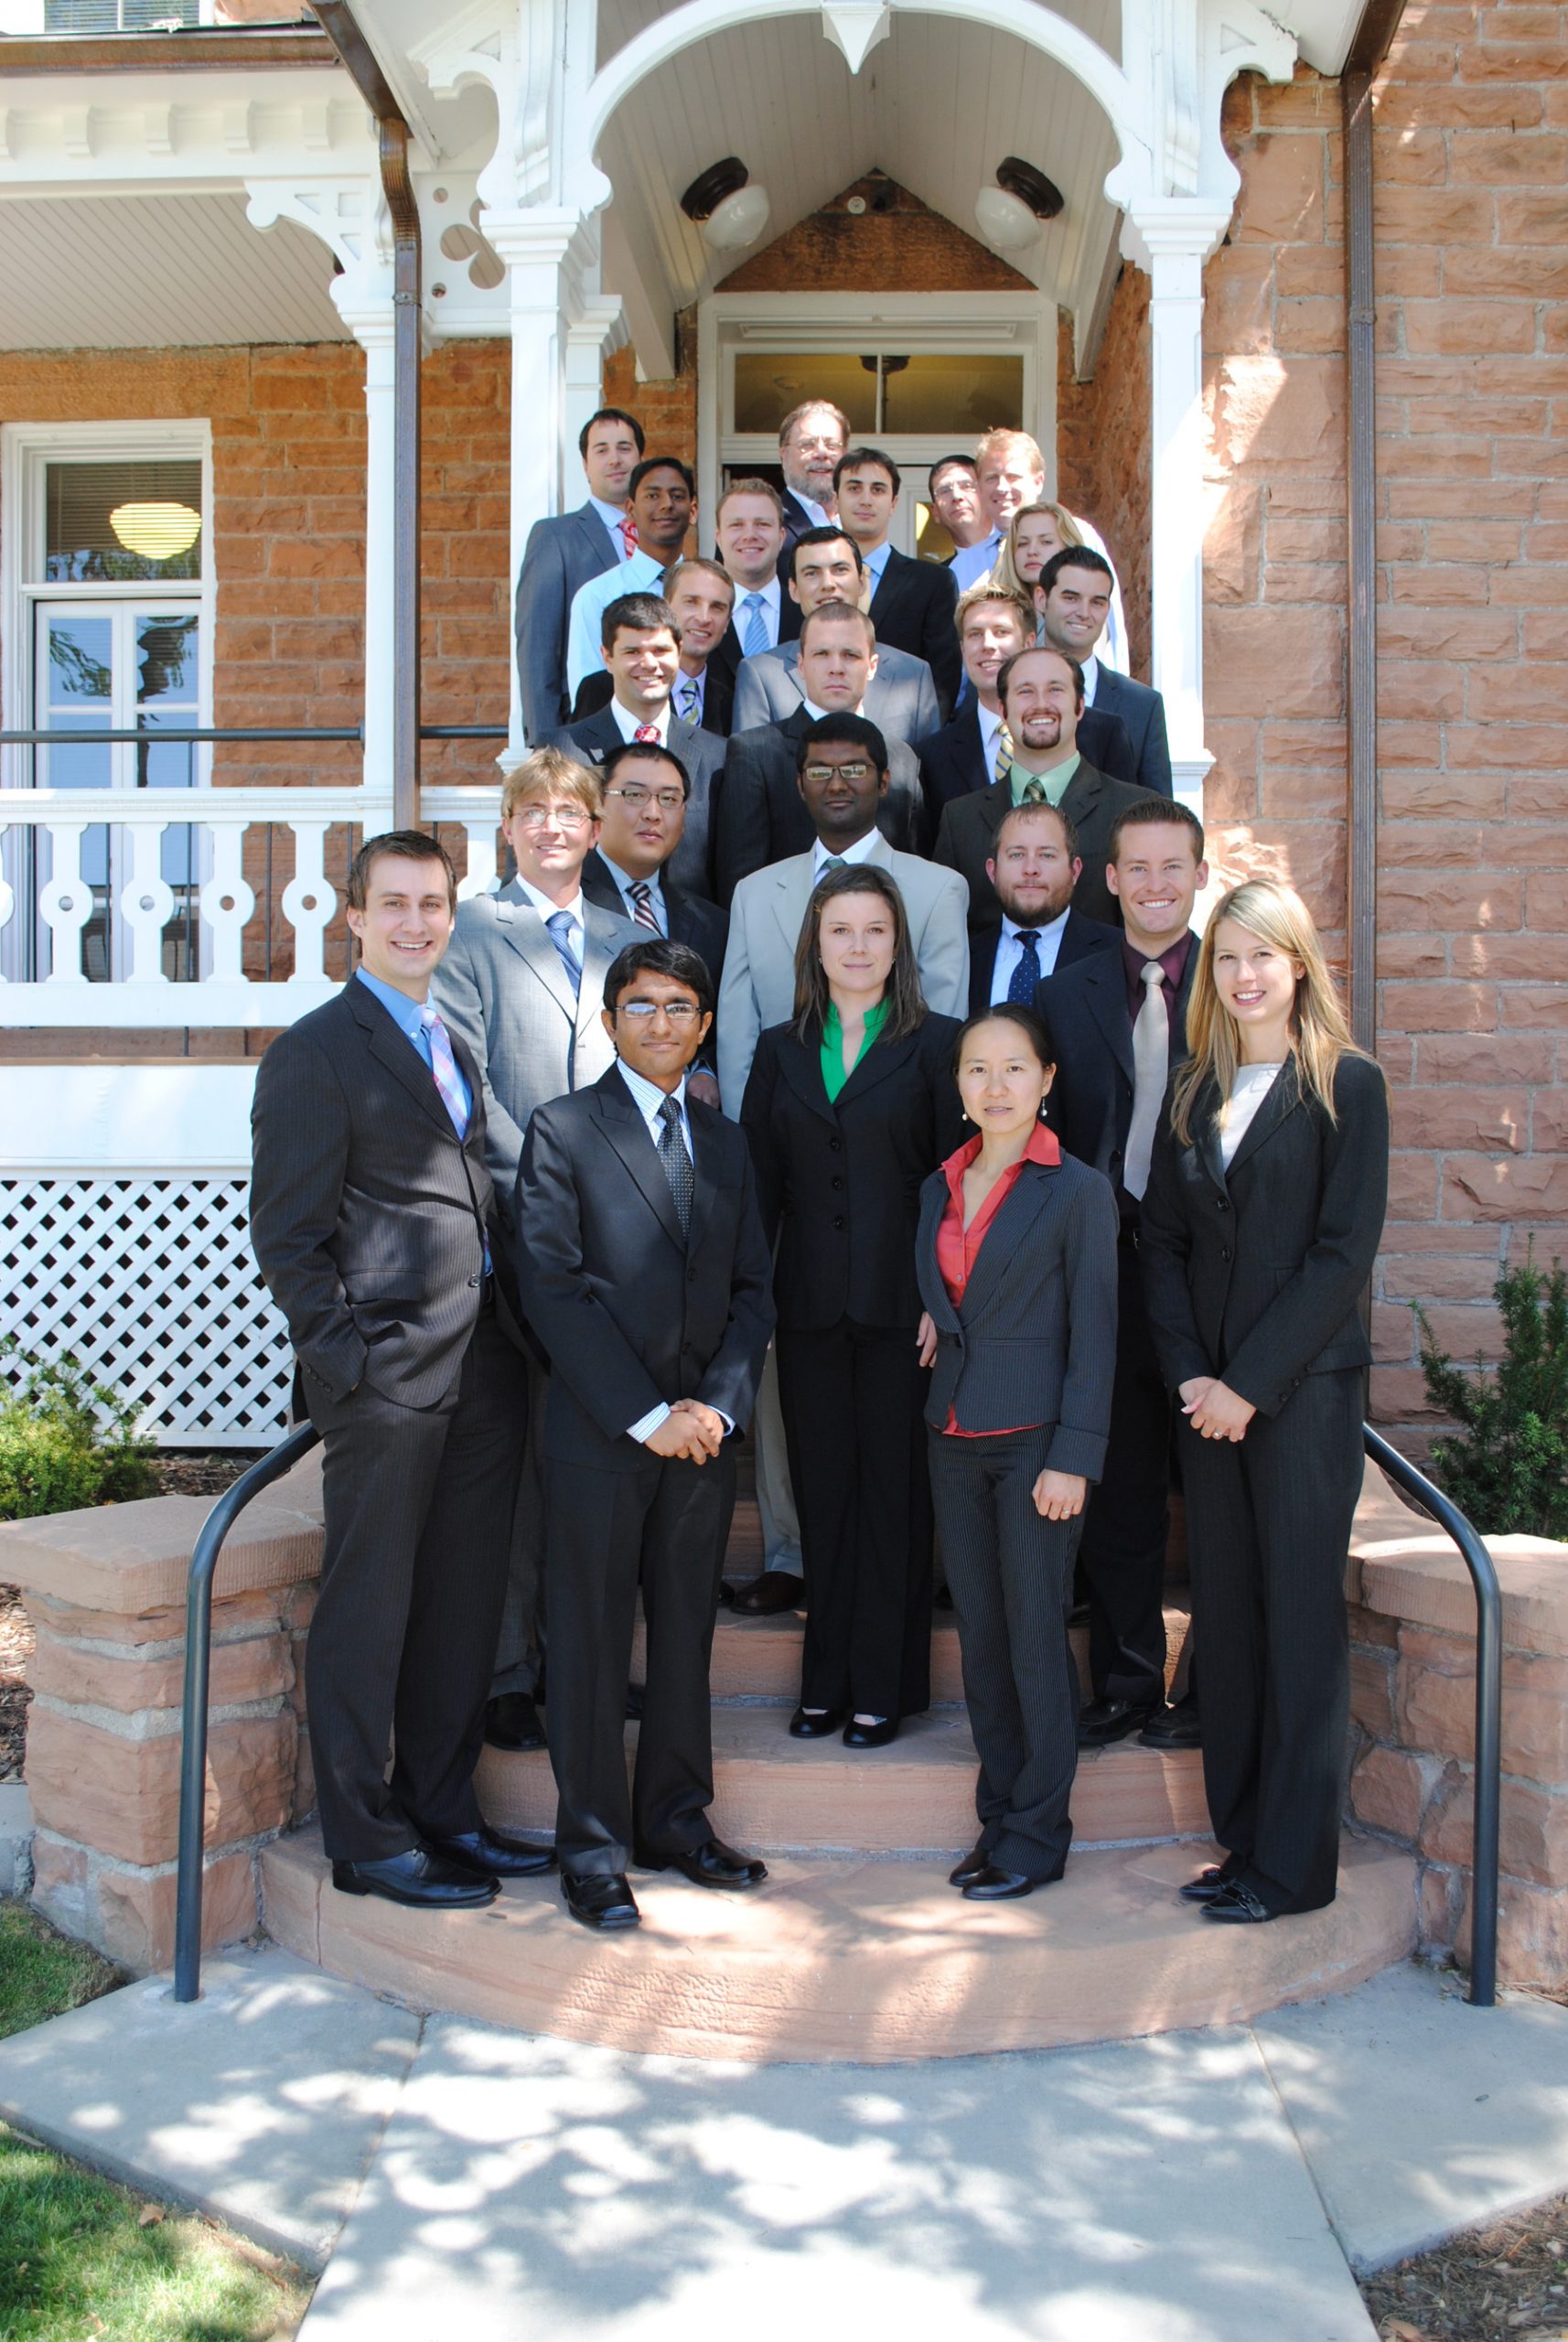 Graduate students in the Lassonde New Venture Development program stand in front of the Lassonde House at University of Utah. Students in the program help write business plans for faculty inventors.